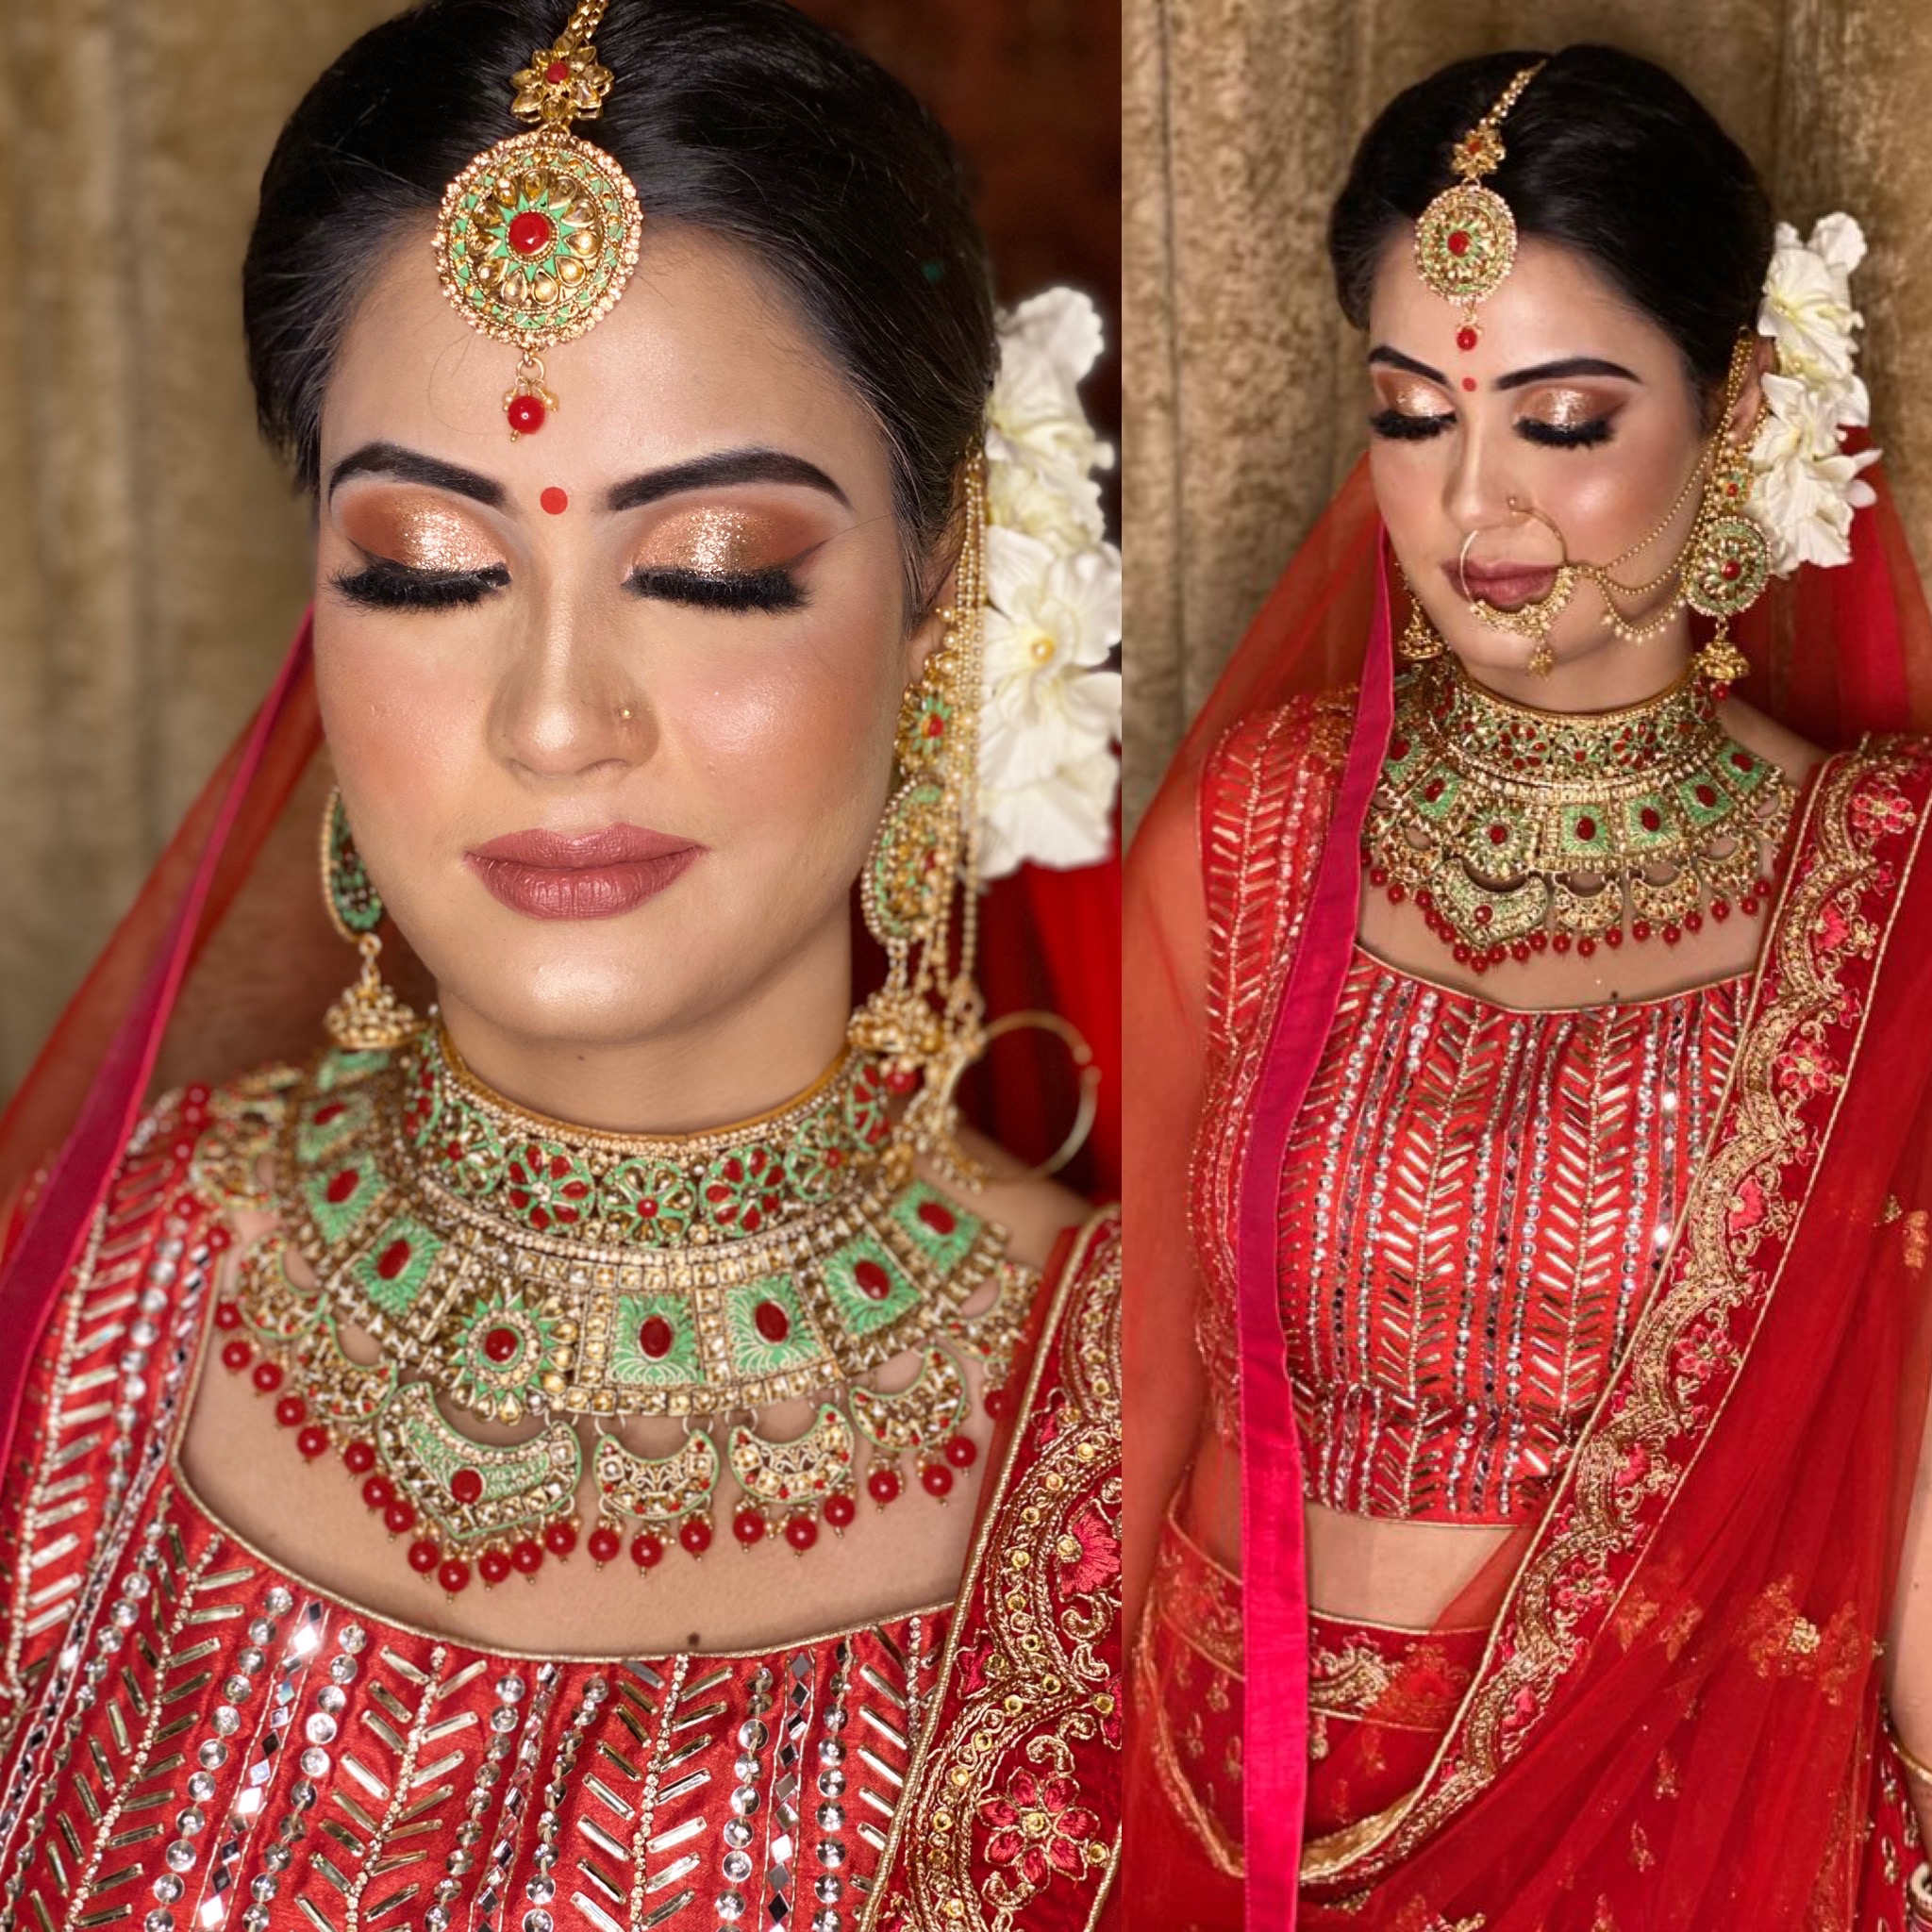 Ridhima Makeup Artist Services, Review and Info - Olready